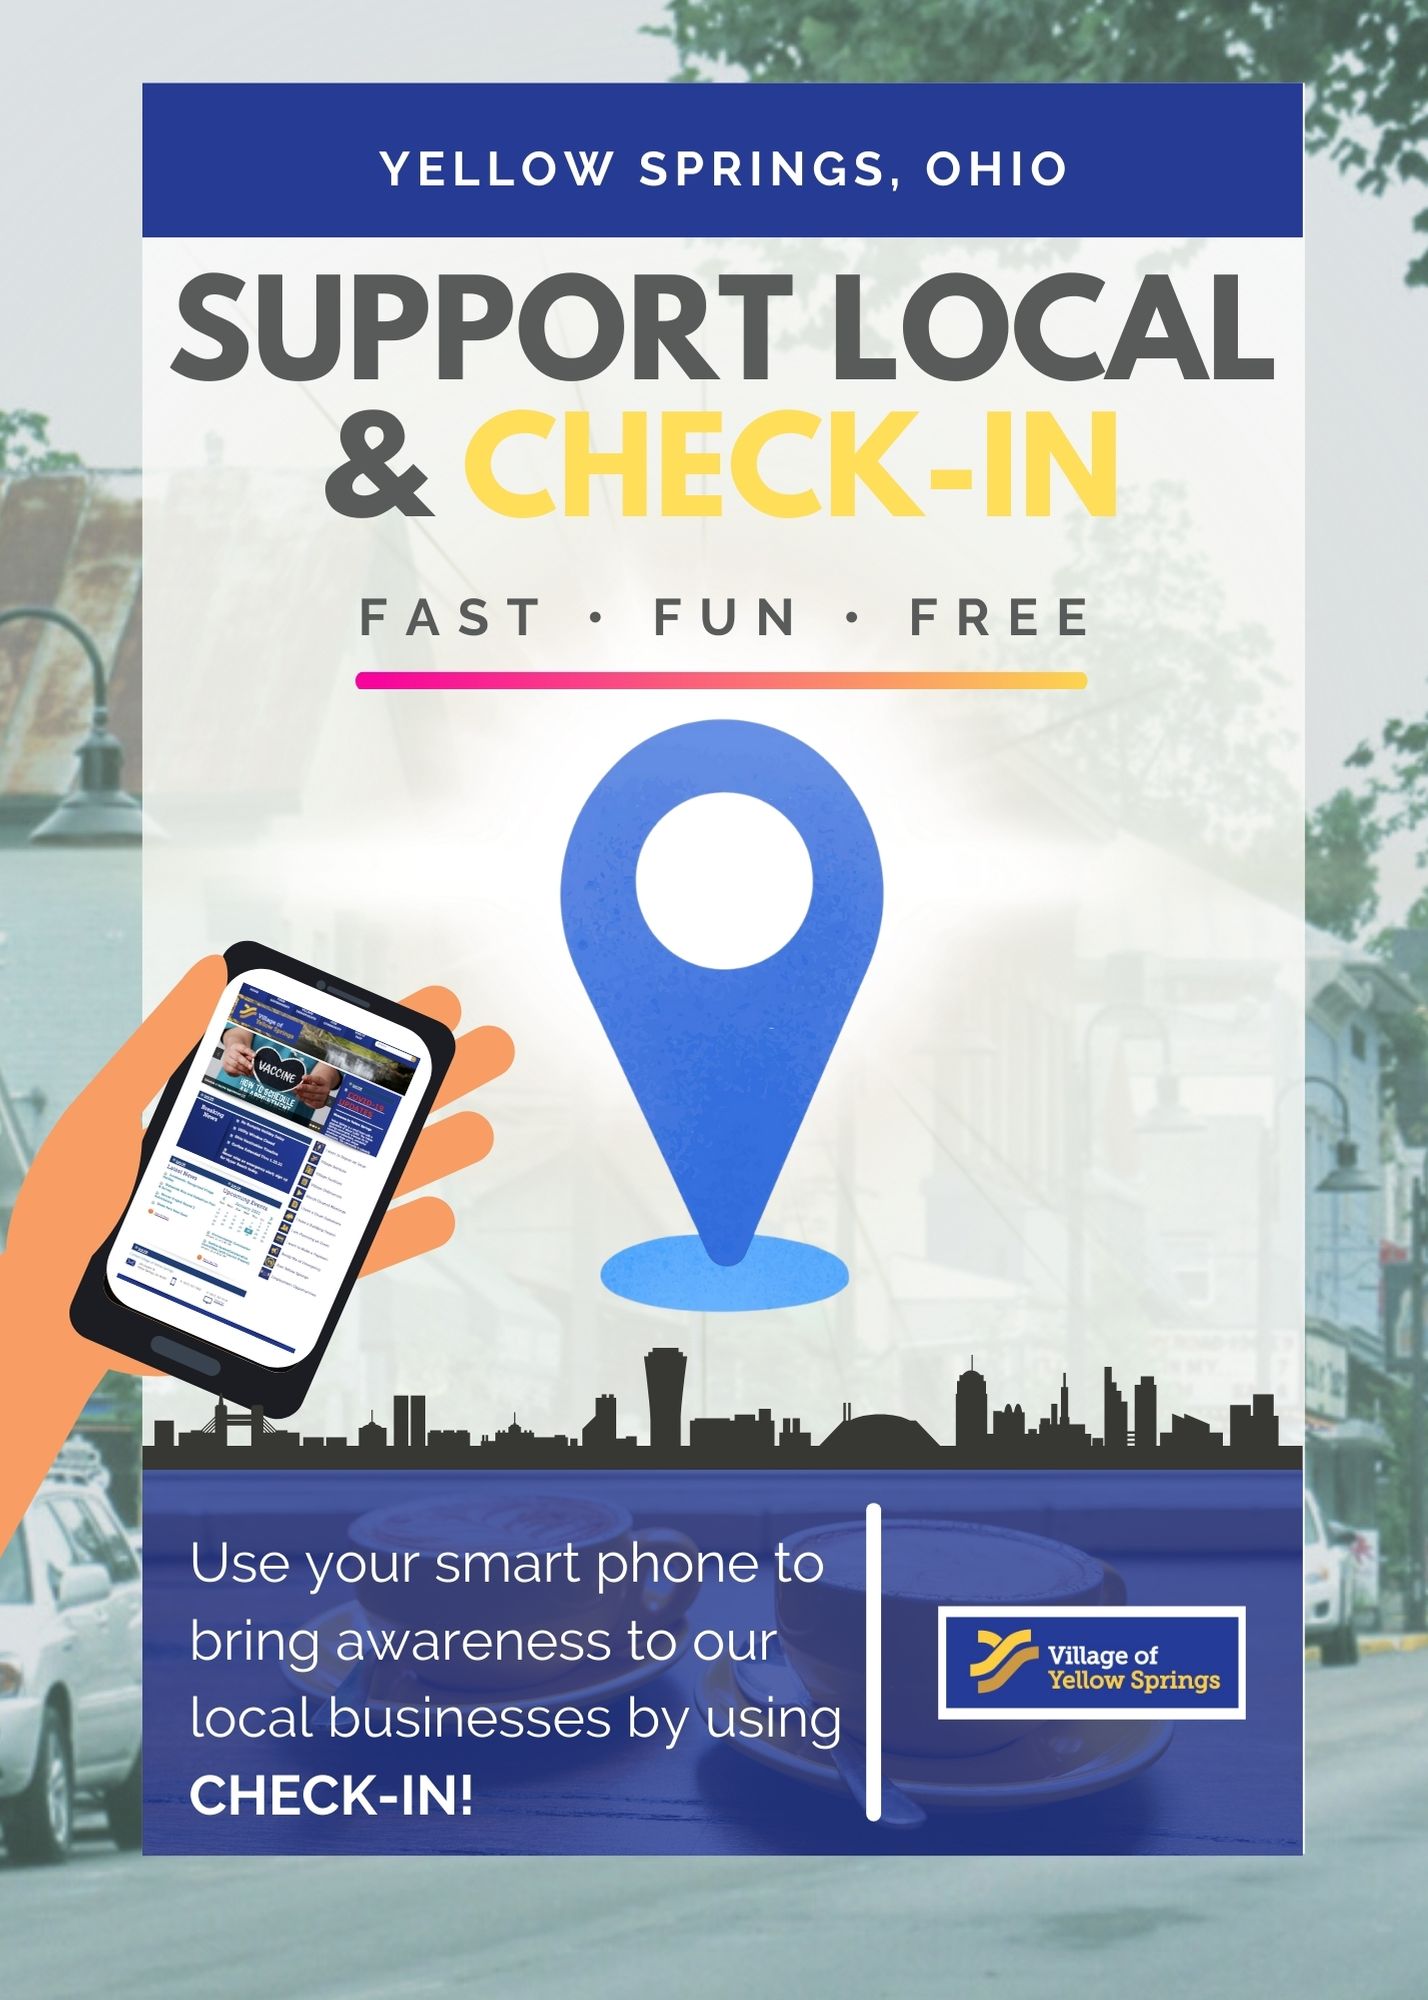 Check-in & Support Local Businesses